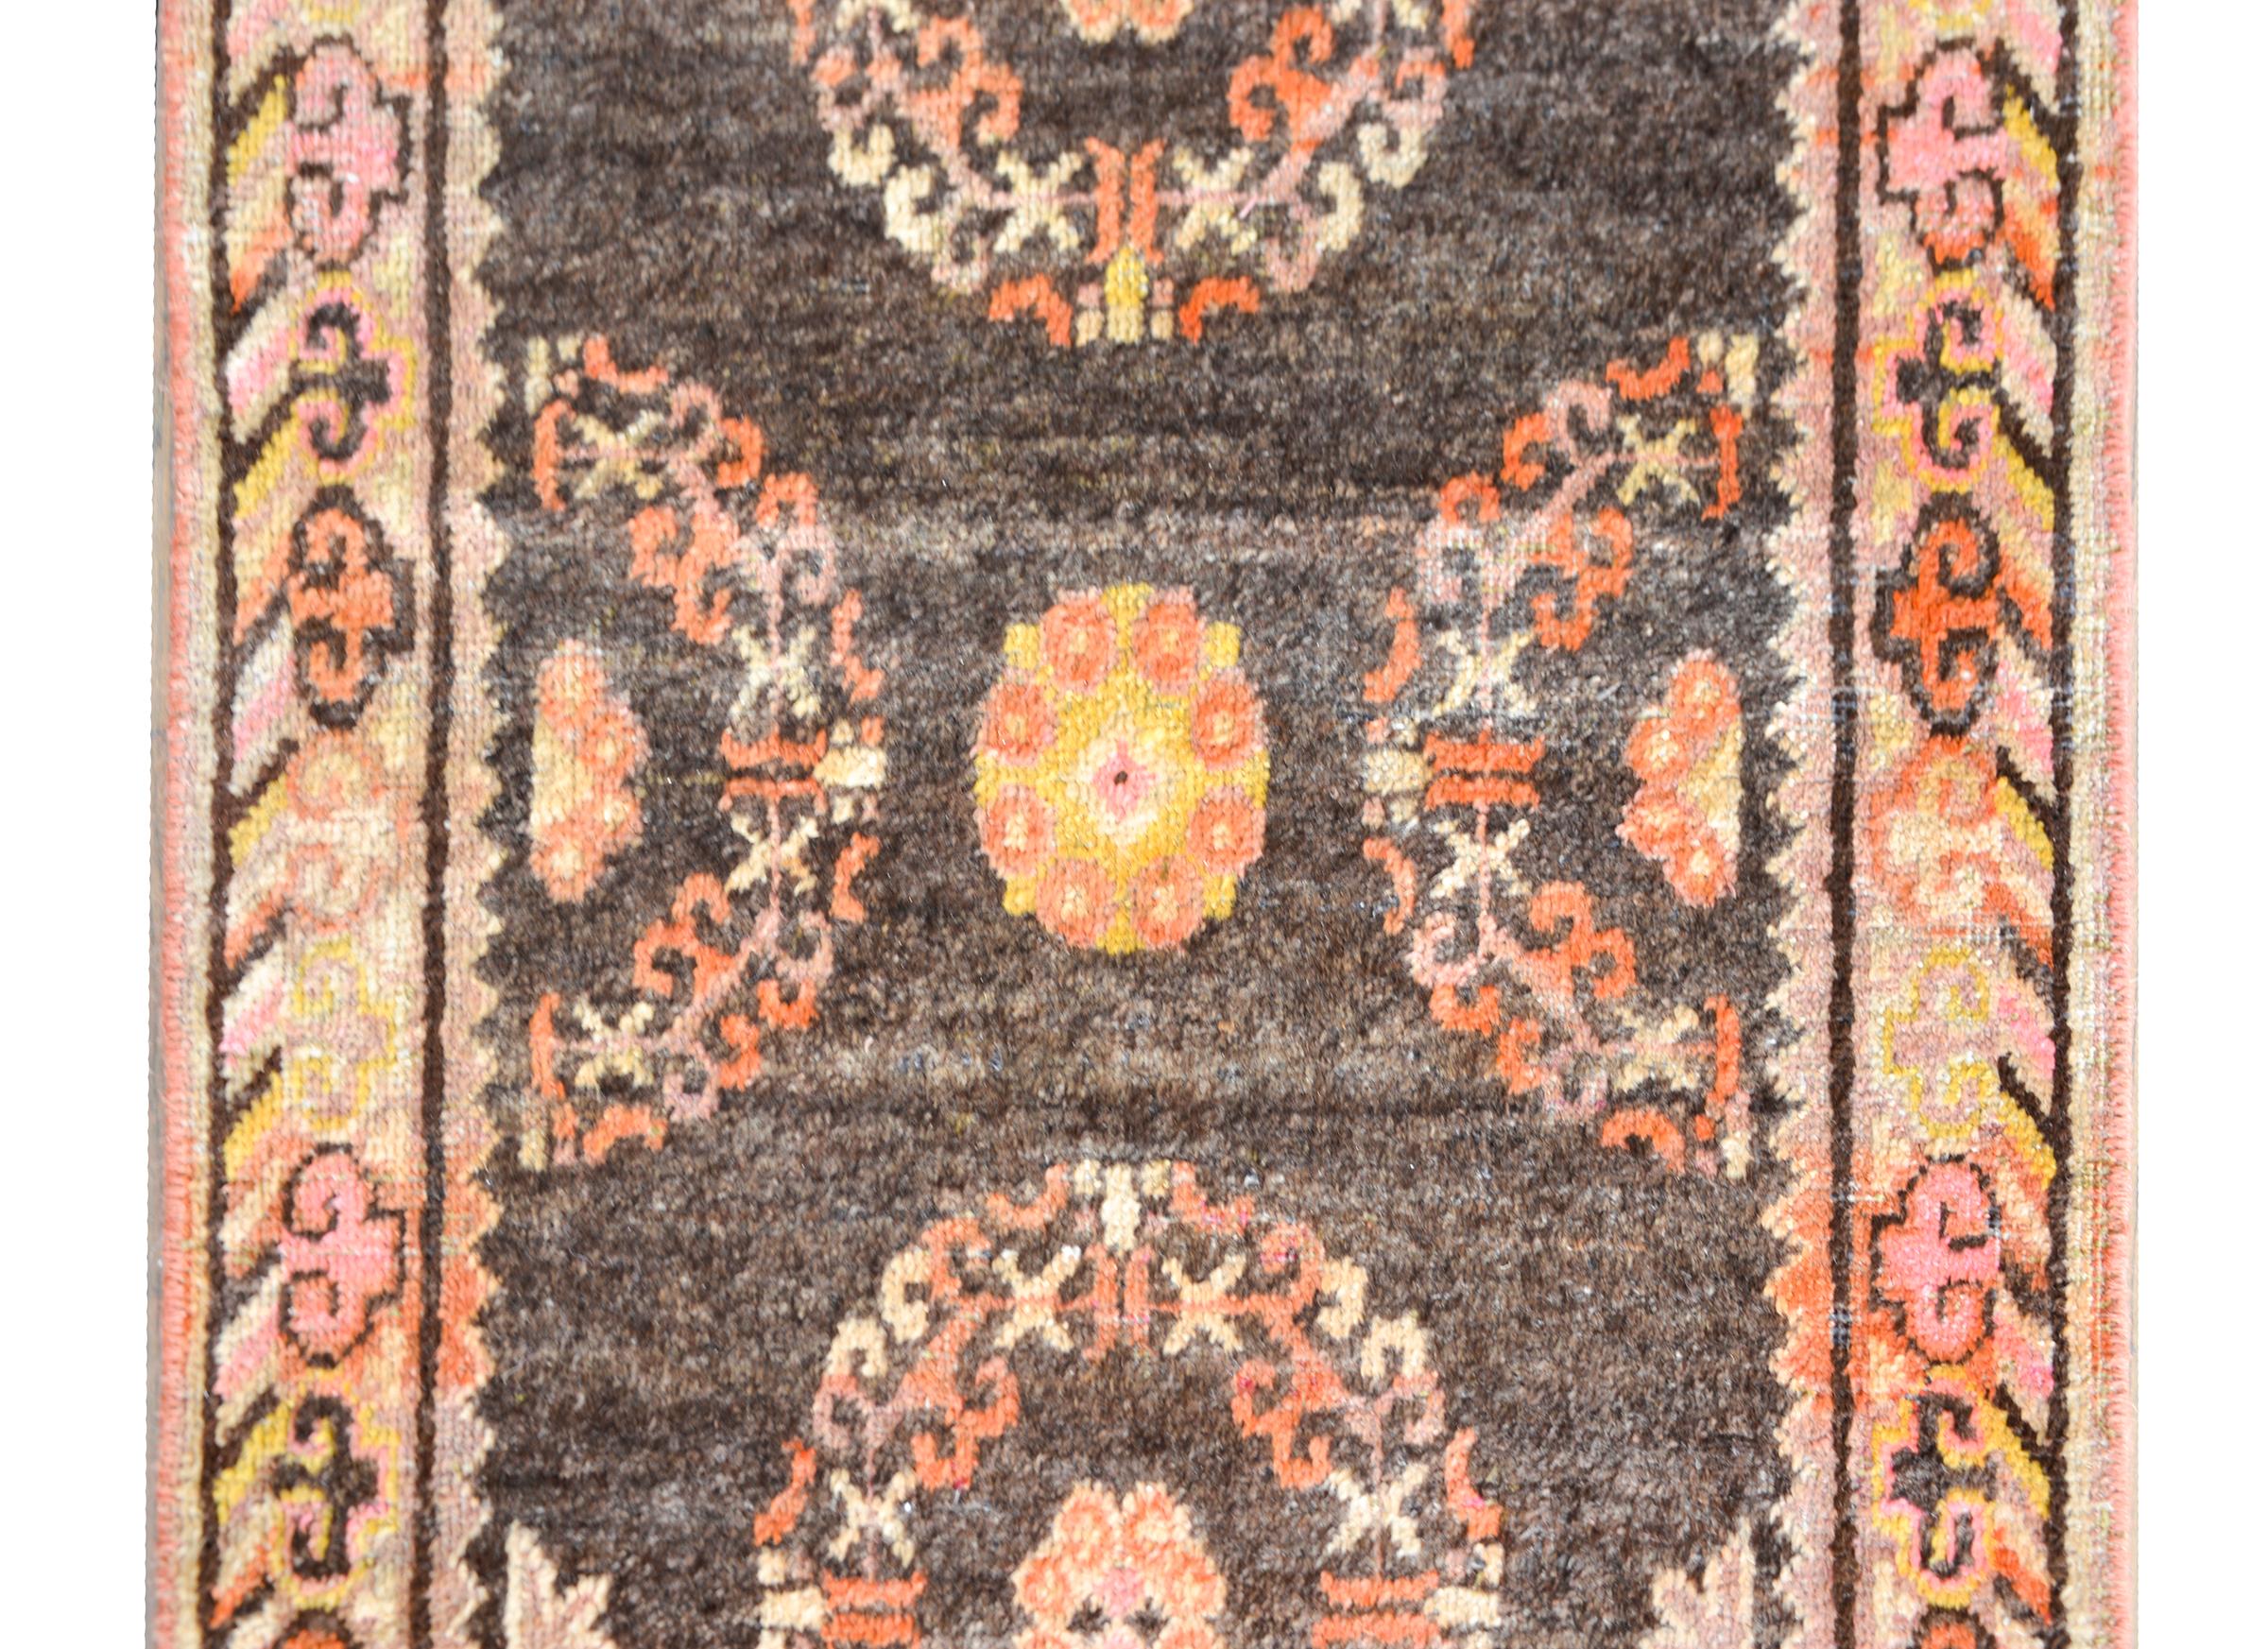 A petite and sweet early 20th century Central Asian Khotan rug with two floral medallions woven in coral, white, gold, and gray wool against a black background and surrounded by a border woven with a turbulent cloud patterned border woven in similar